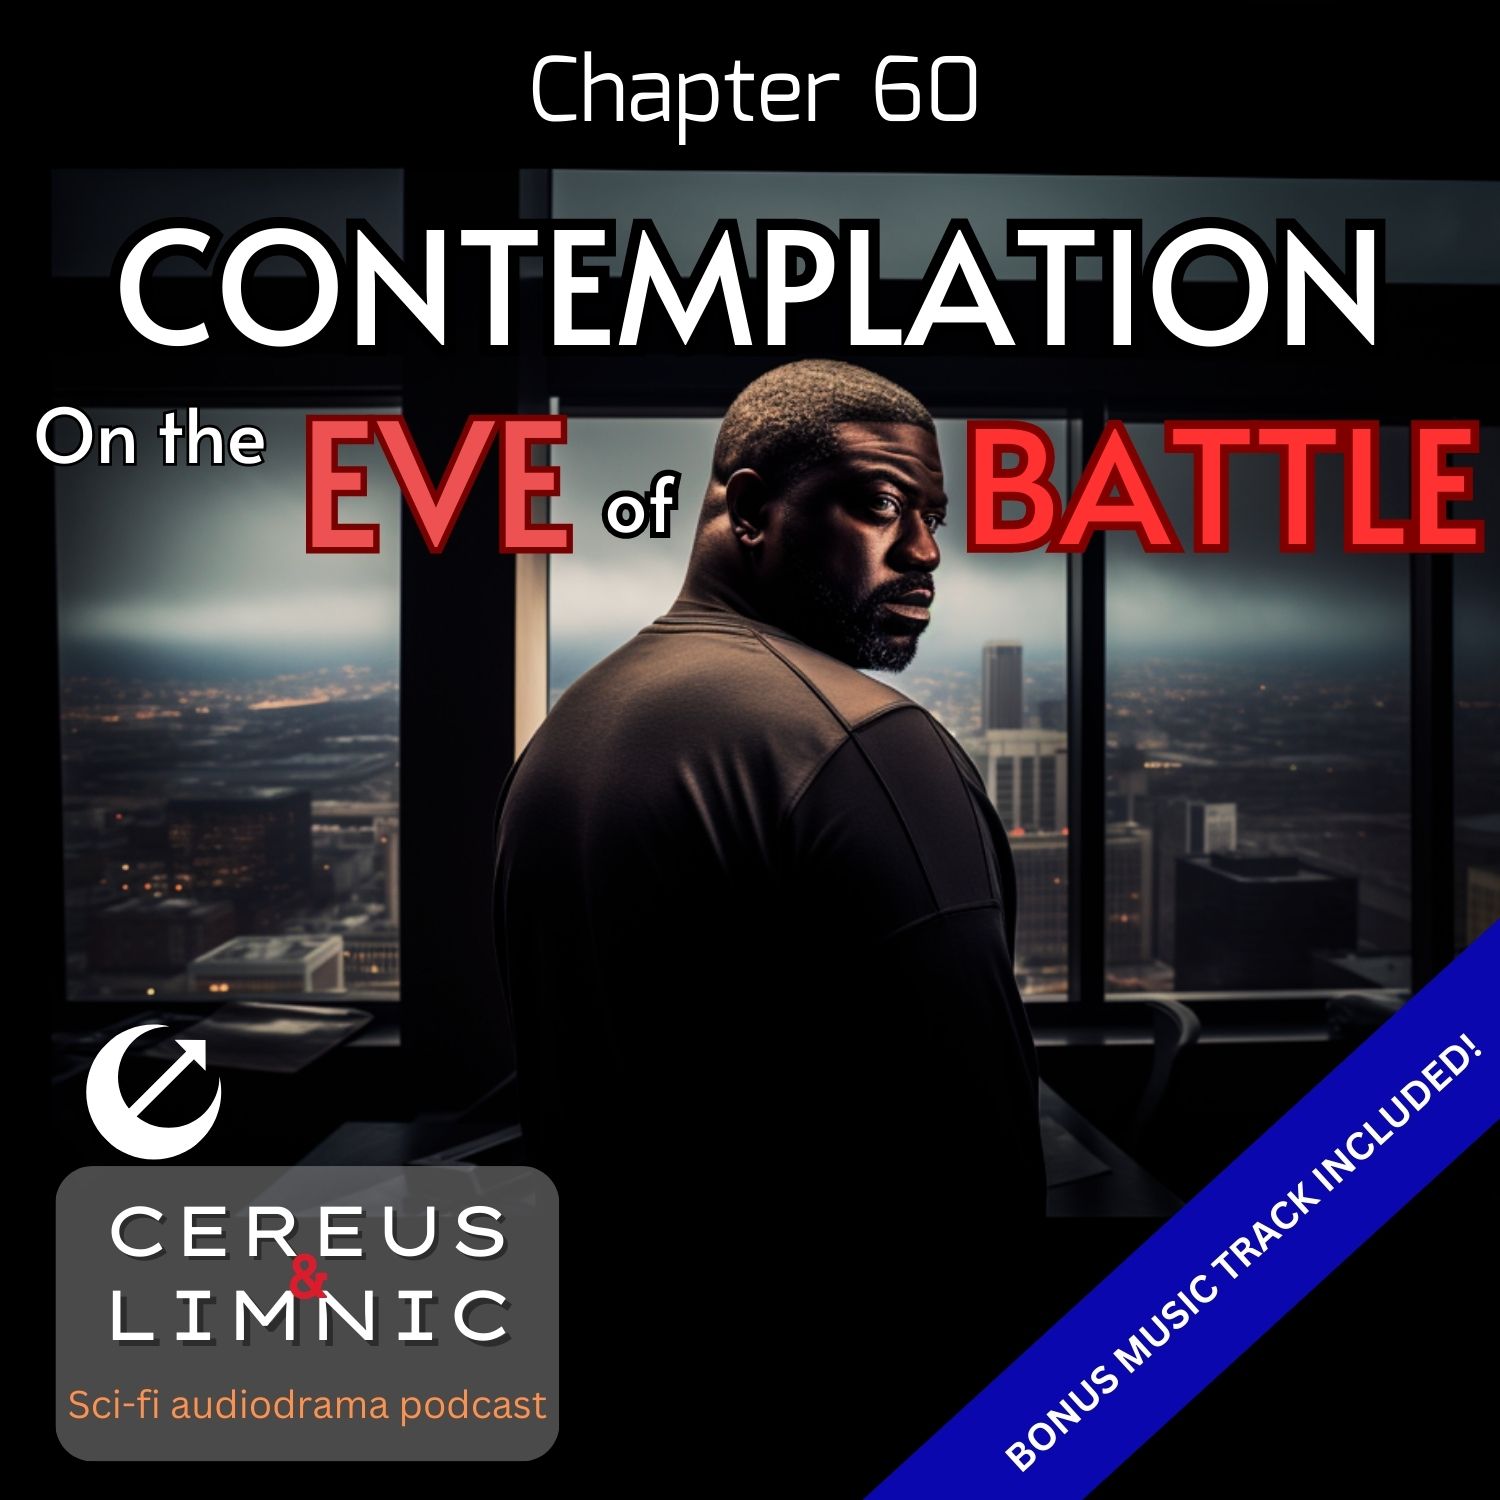 Chapter 60: Contemplation on the Eve of Battle